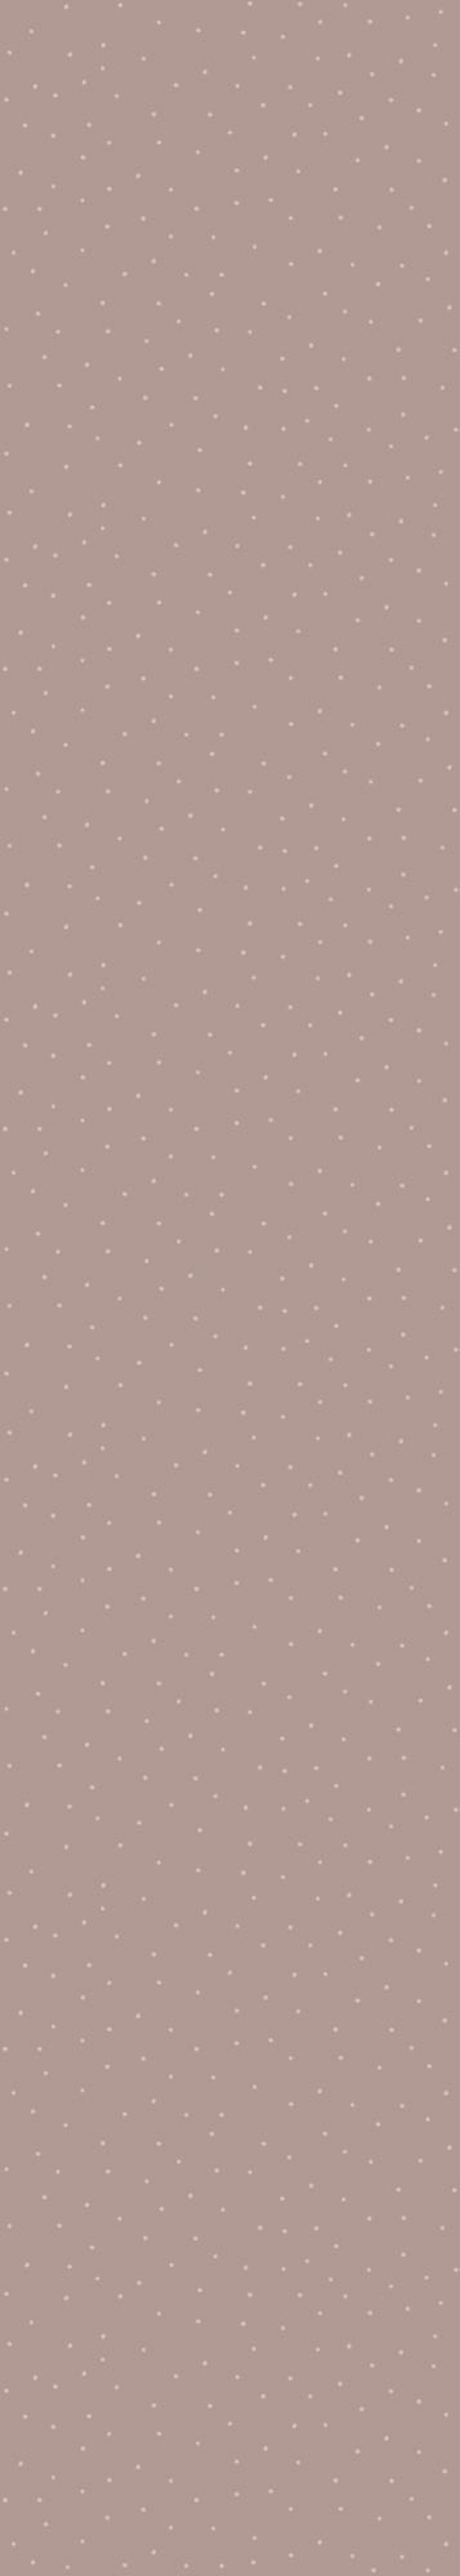 Tiny Speckles On Mocca Wallpaper 50x280CM